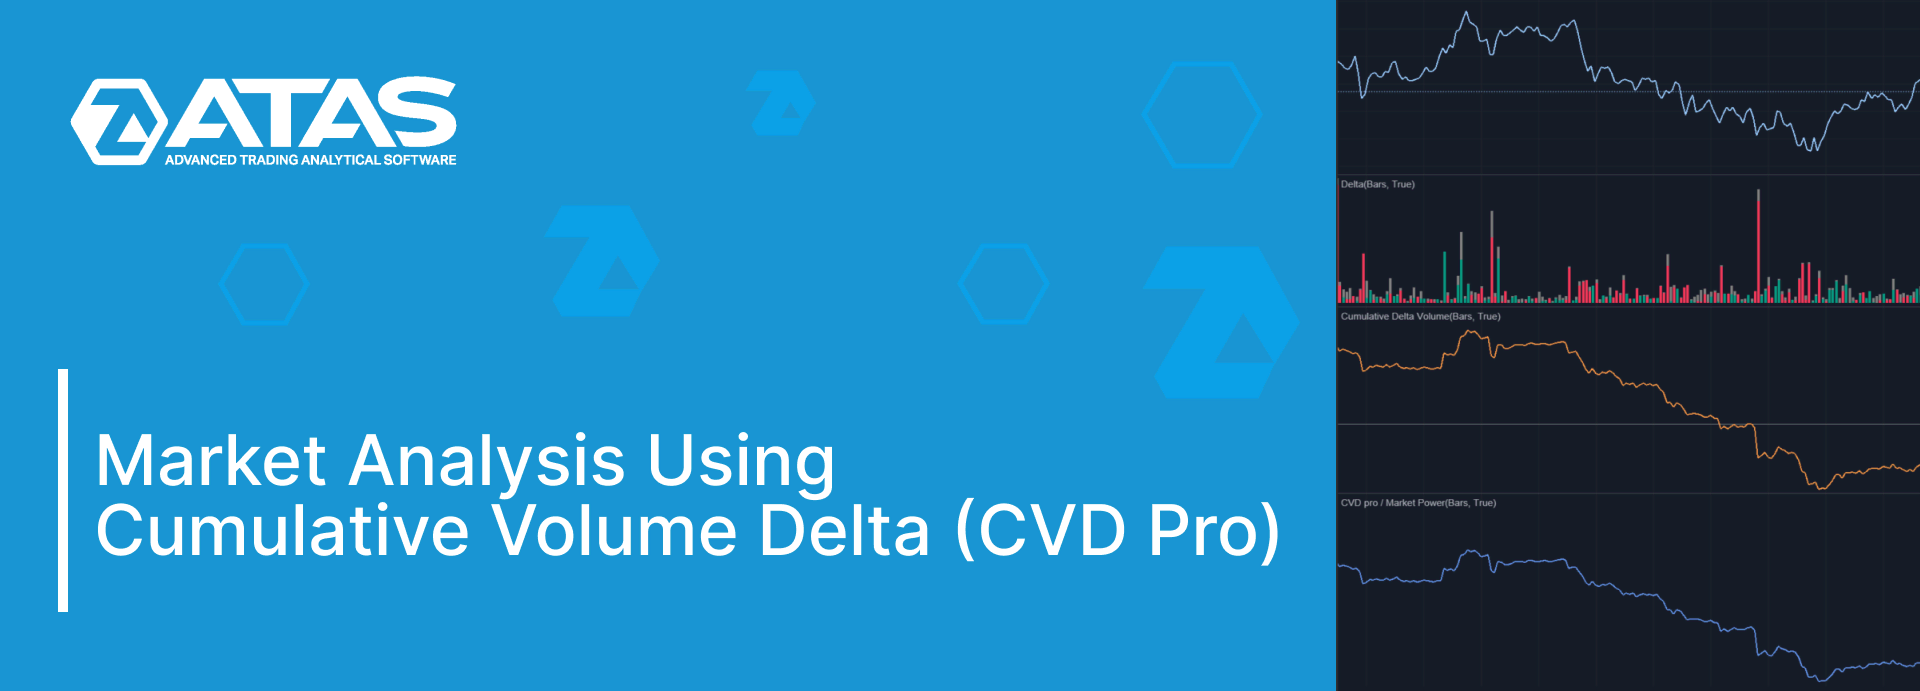 CVD Pro. How to Use the Cumulative Volume Delta